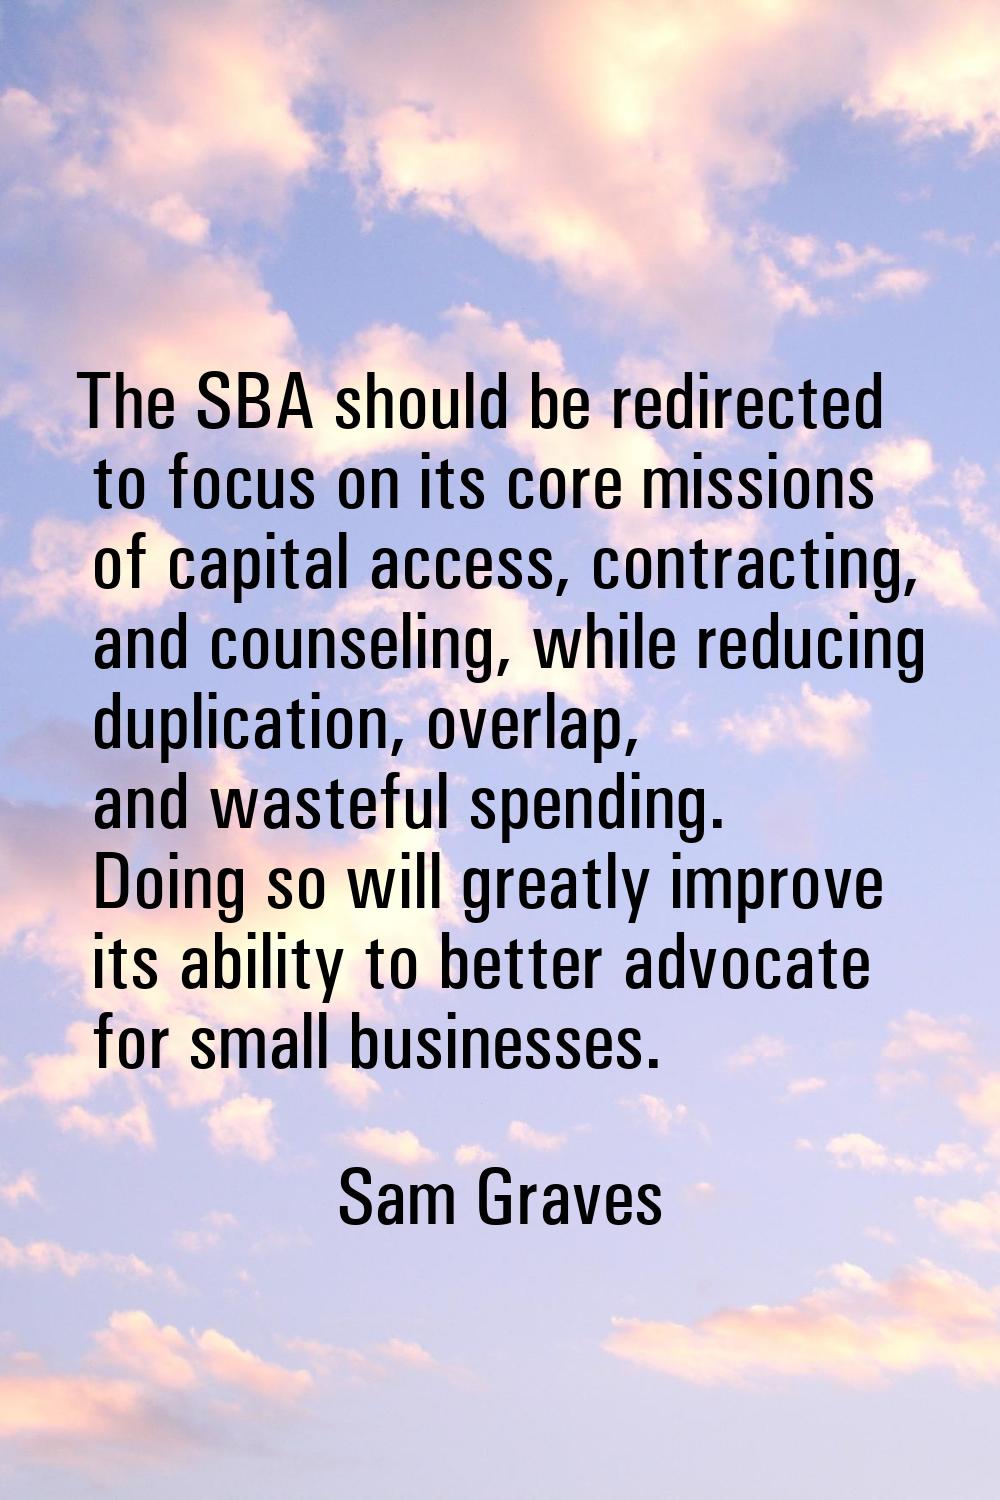 The SBA should be redirected to focus on its core missions of capital access, contracting, and coun